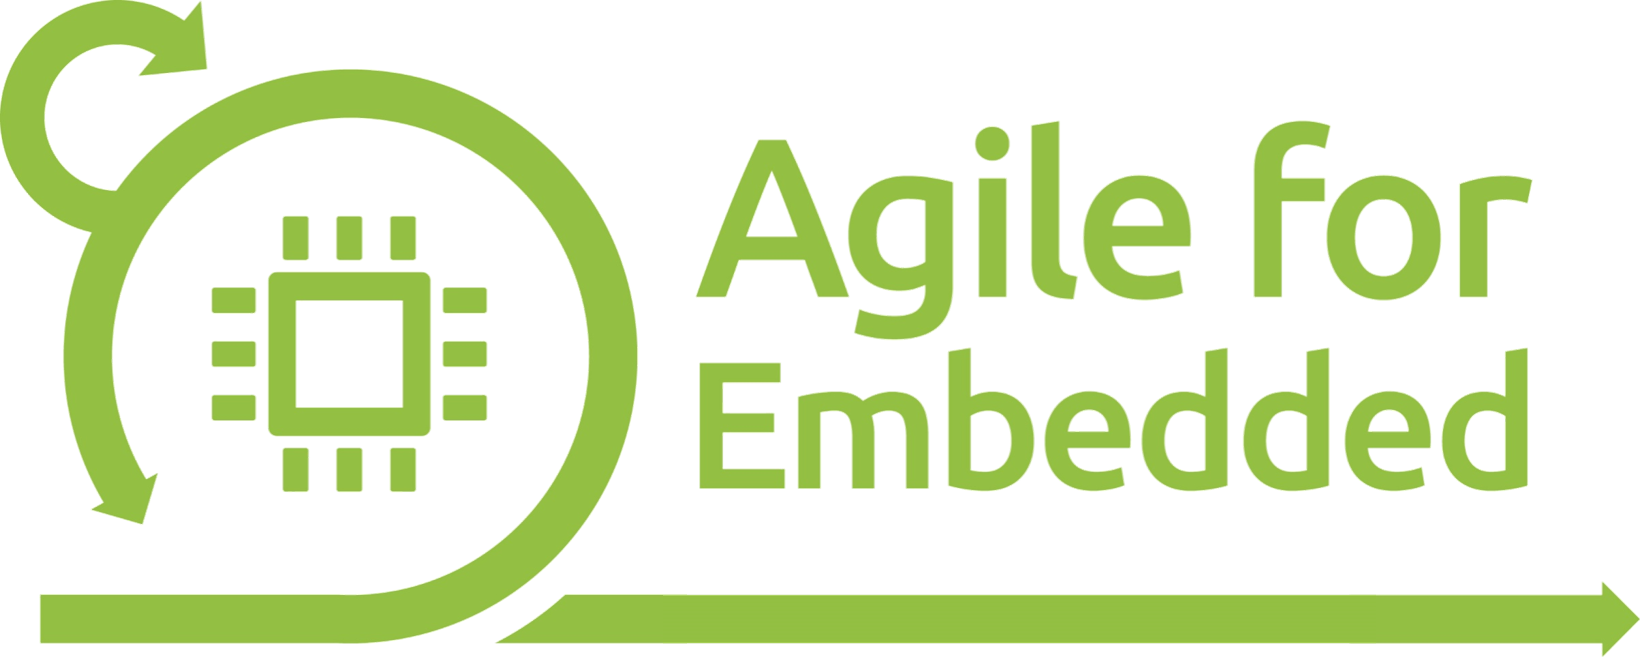 Agile for Embedded large.png